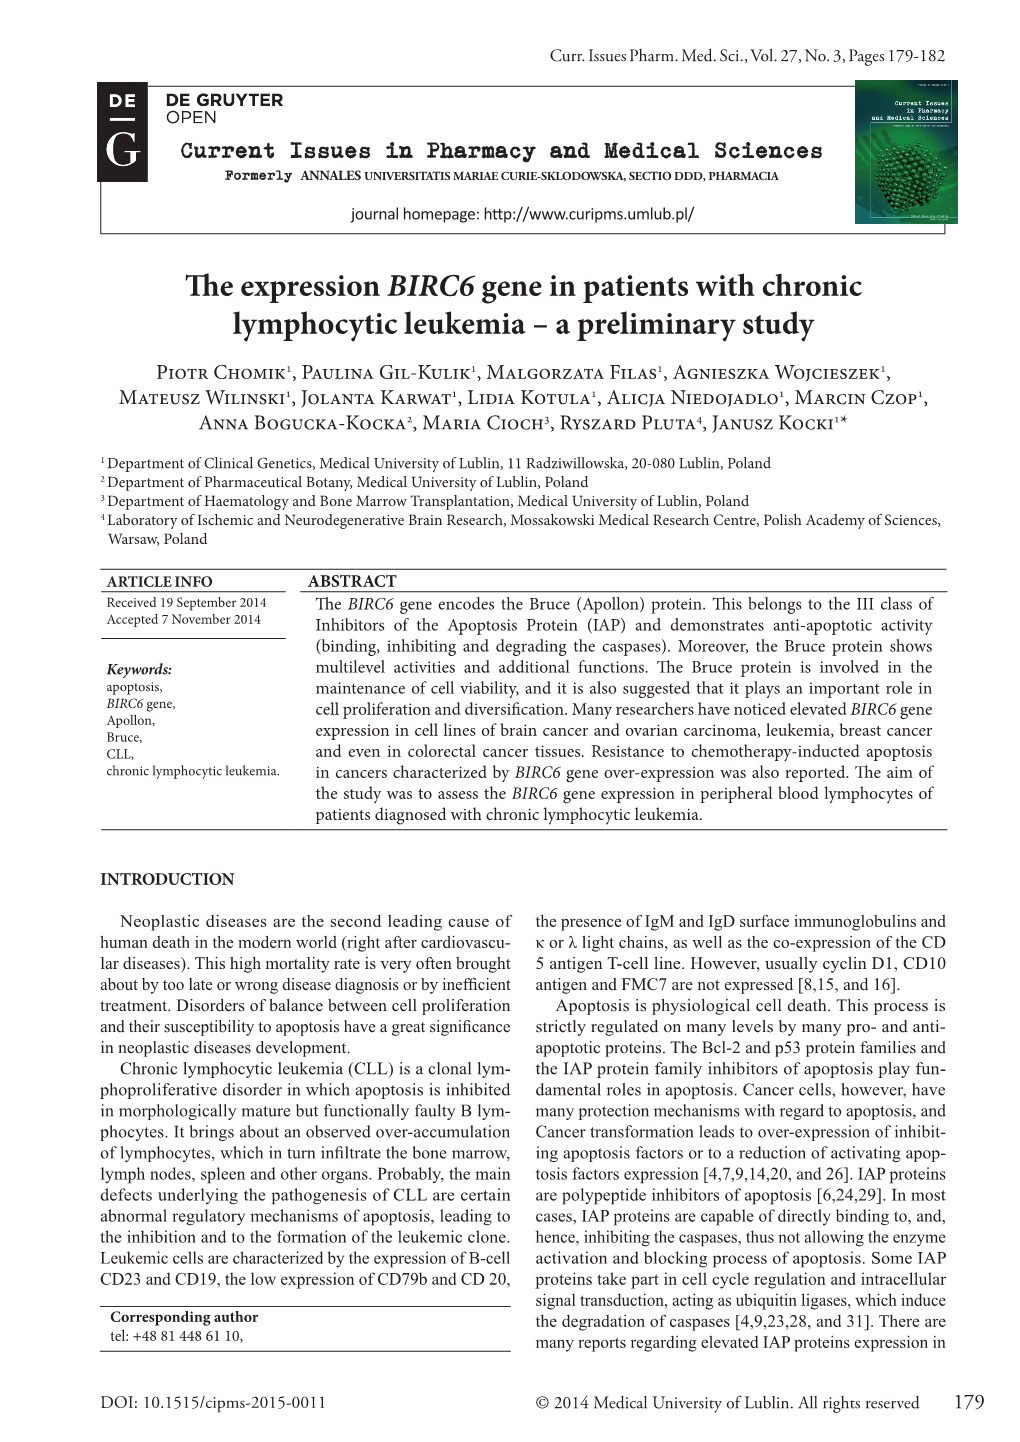 The Expression BIRC6 Gene in Patients with Chronic Lymphocytic Leukemia